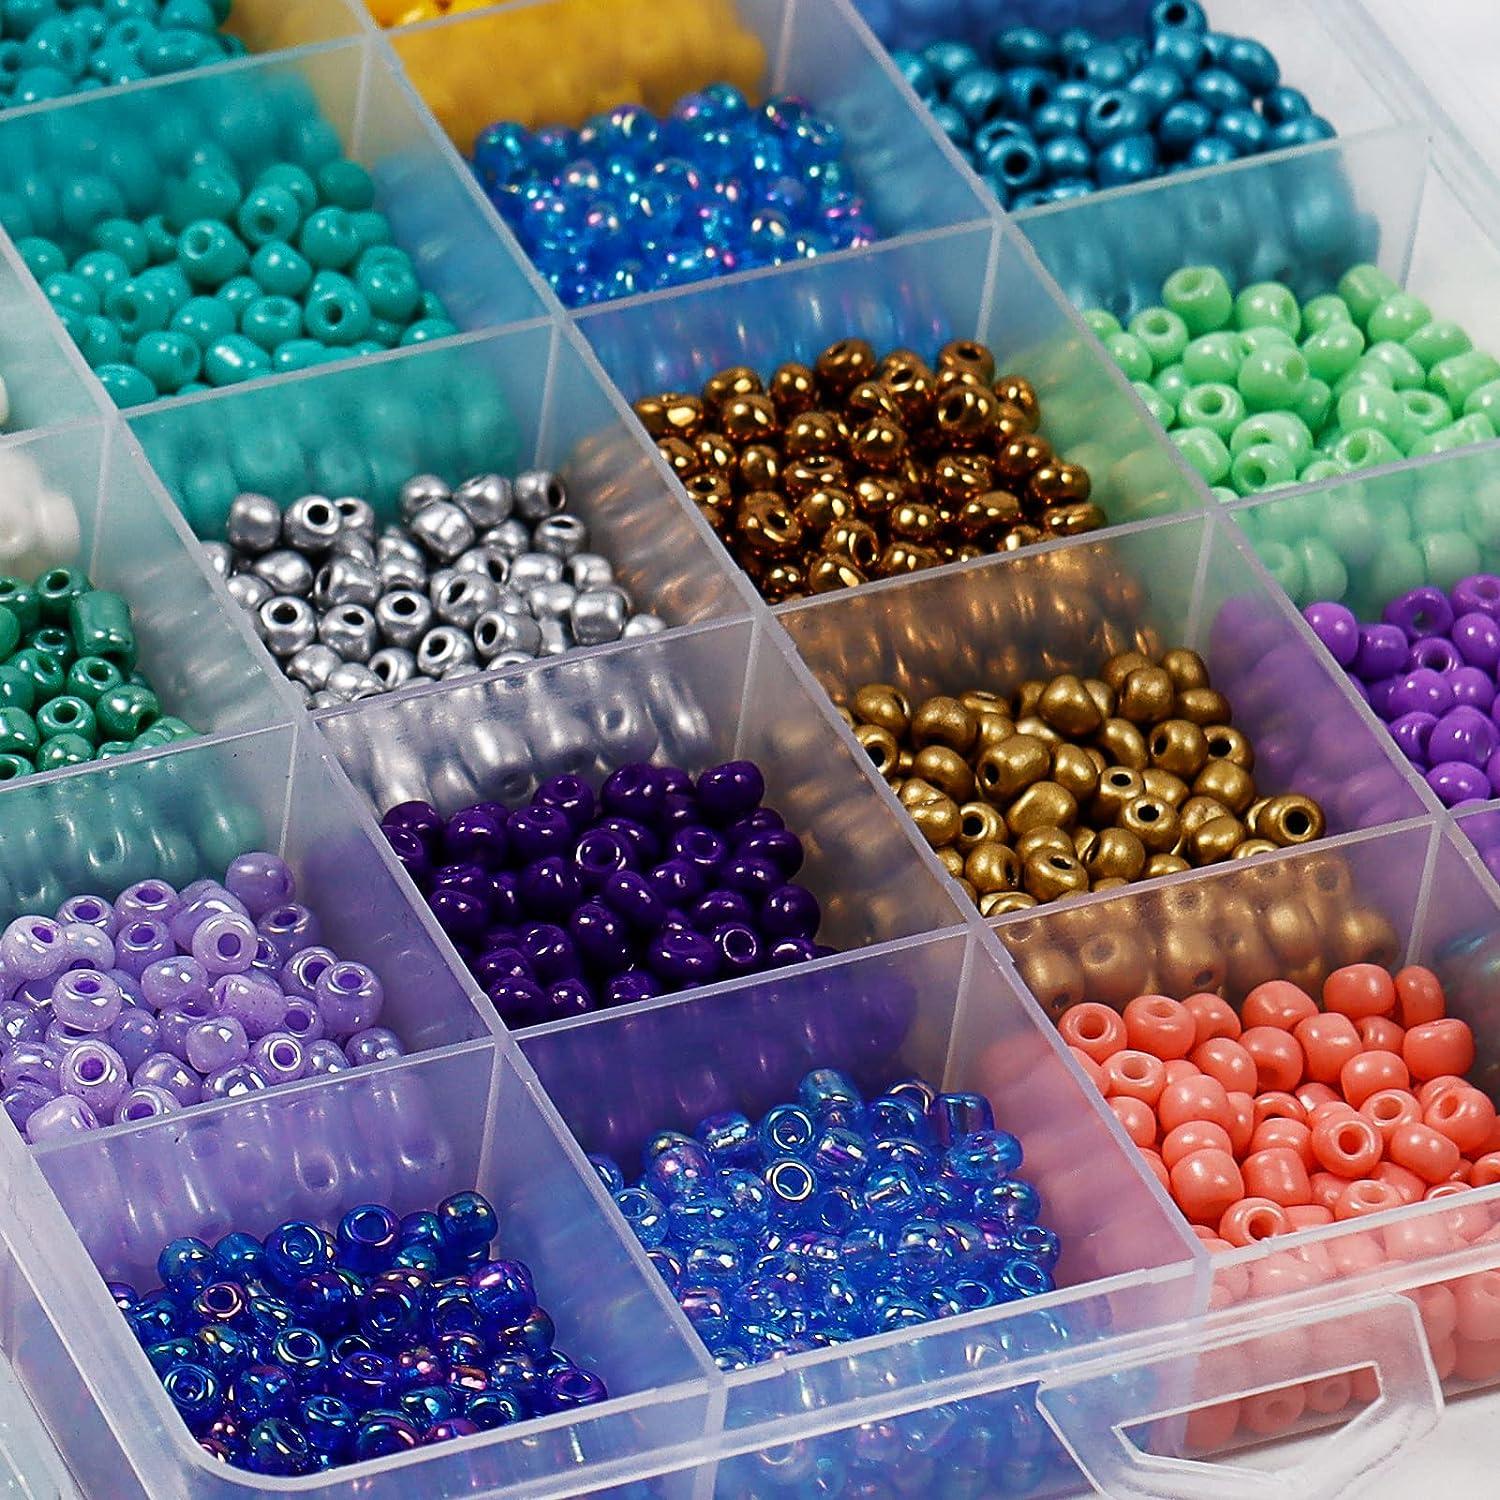 VOOMOLOVE voomolove 8/0 3mm glass seed beads about12000pcs 24 colors loose  craft beads kit earring making seed beads with 24-grid plast